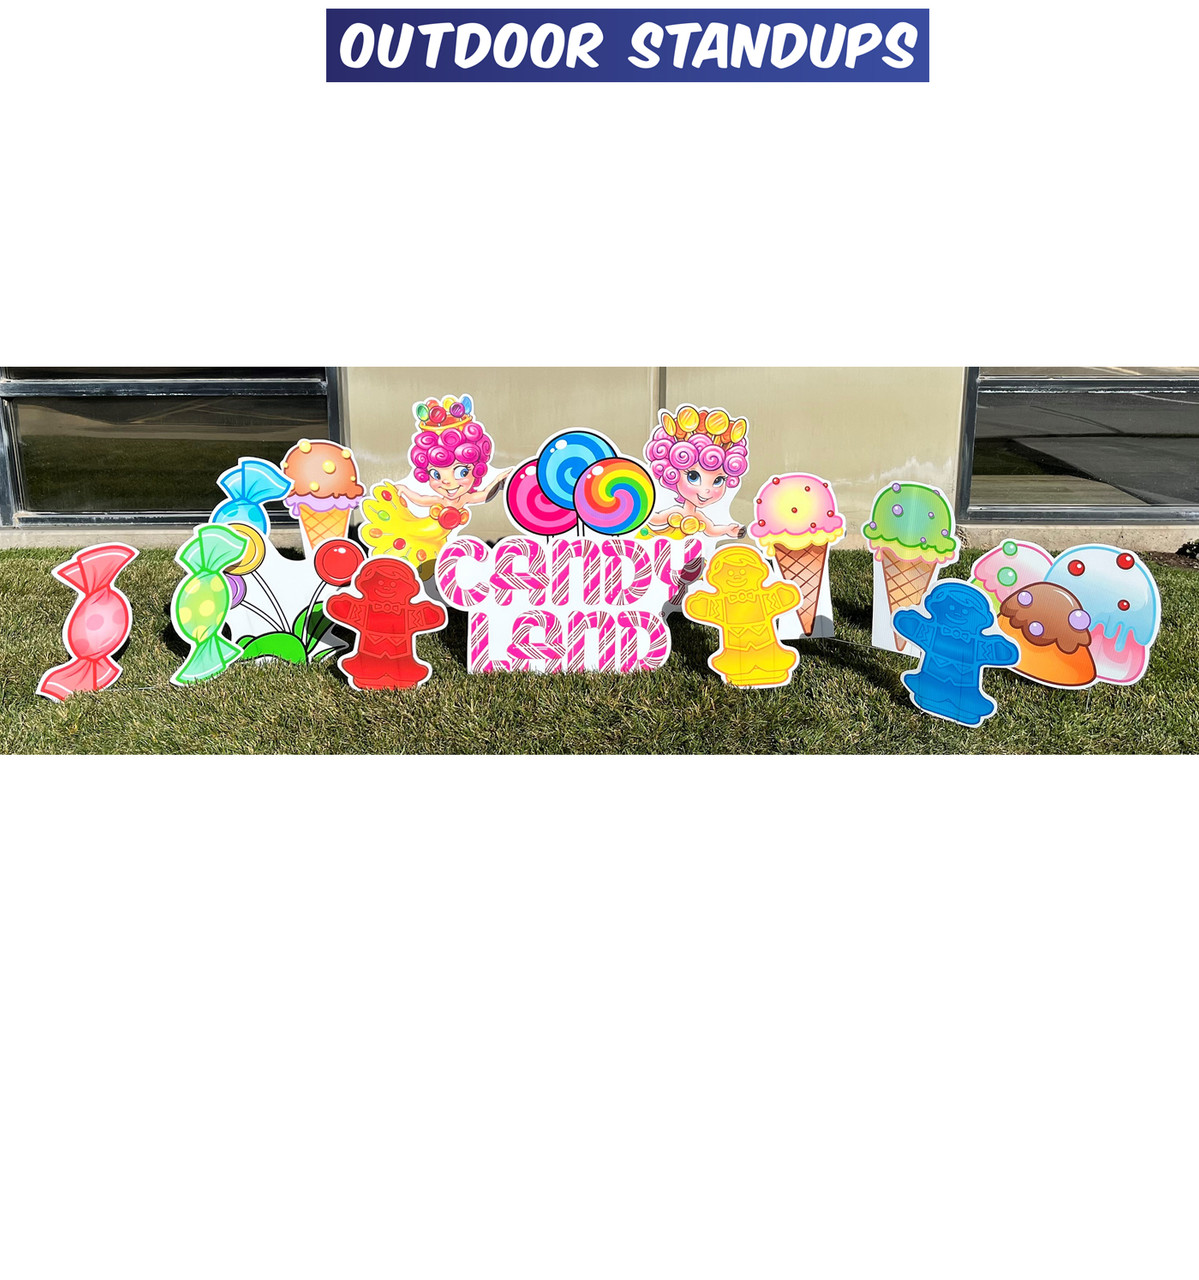 candyland game piece cutouts